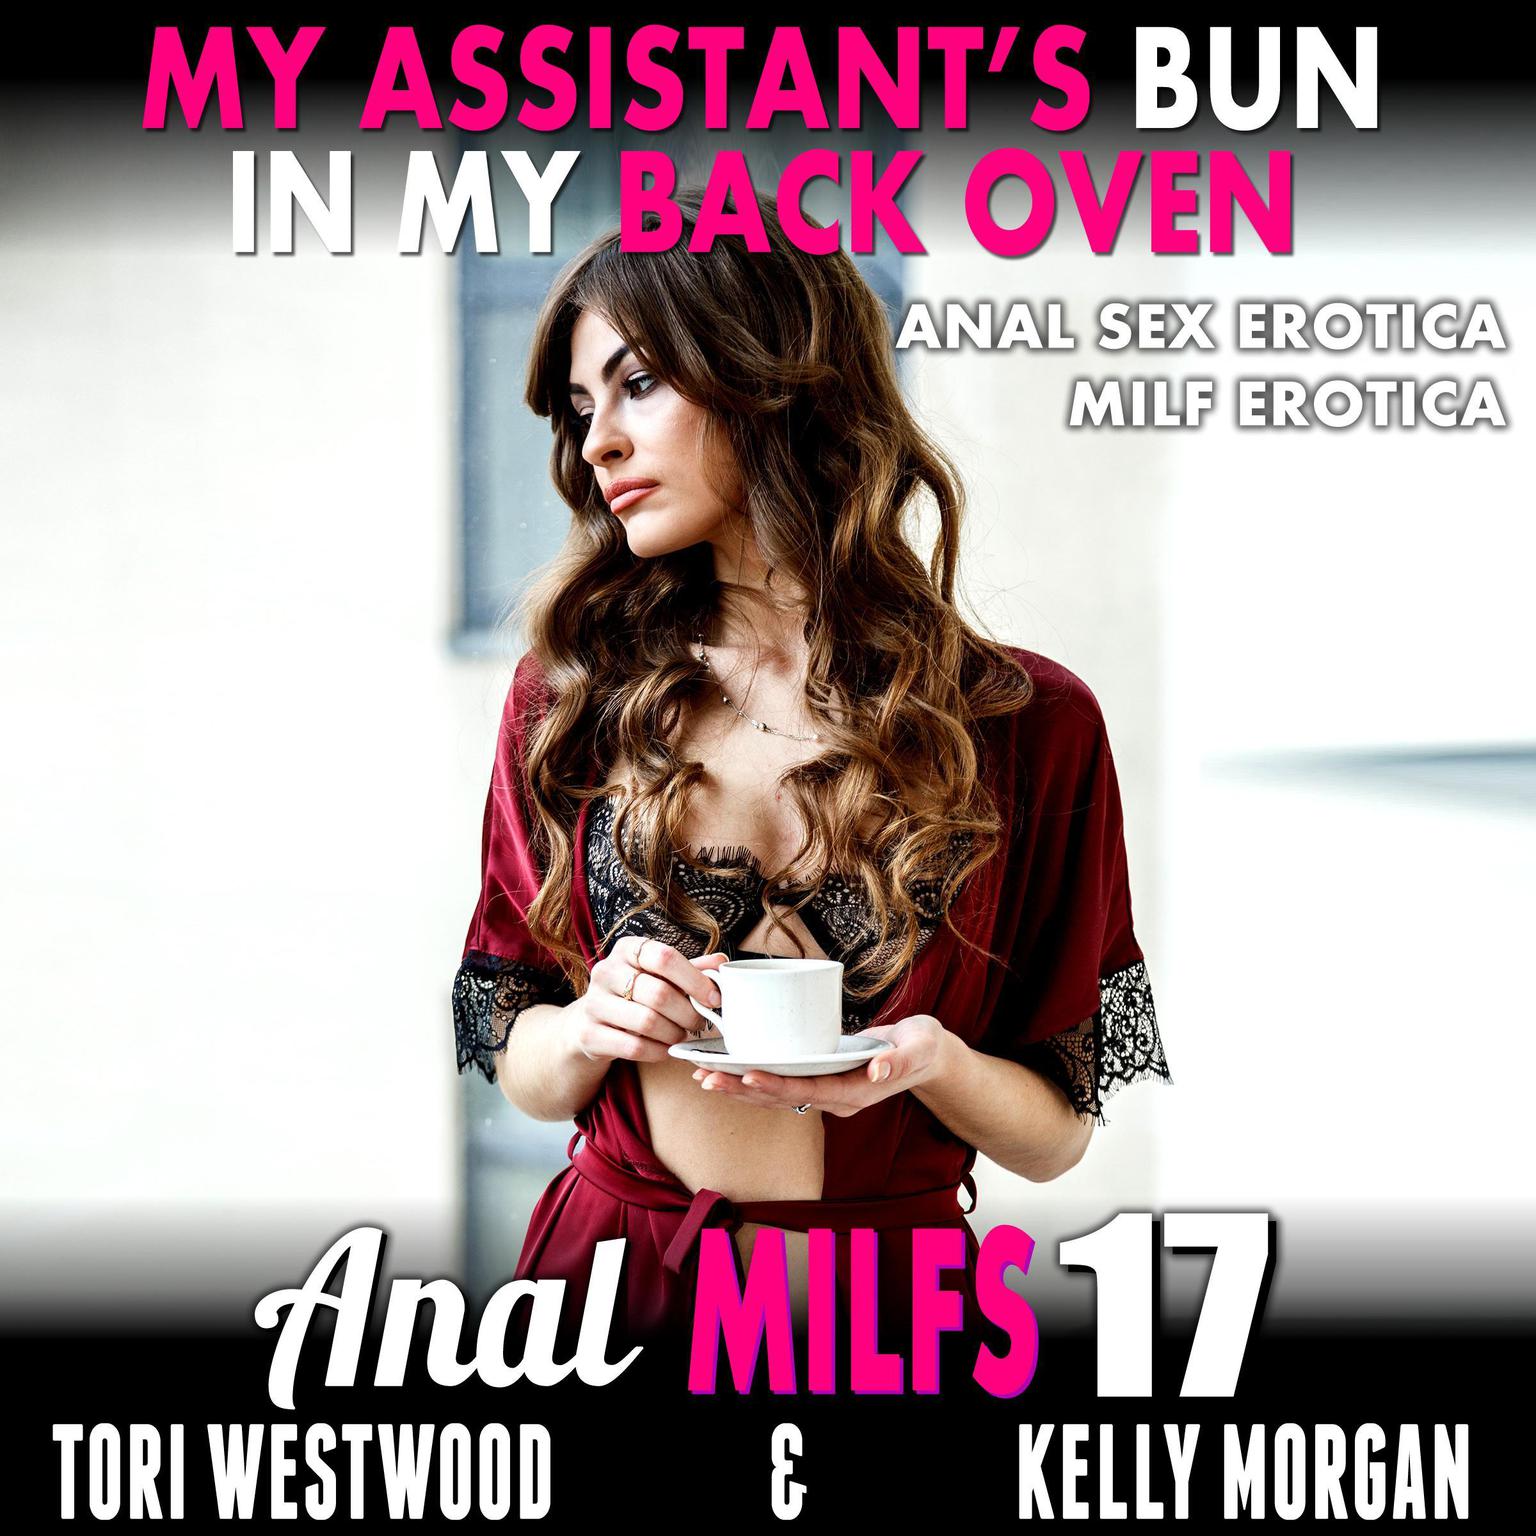 My Assistant’s Bun In My Back Oven: Anal Sex Erotica MILF Erotica Audiobook, by Tori Westwood